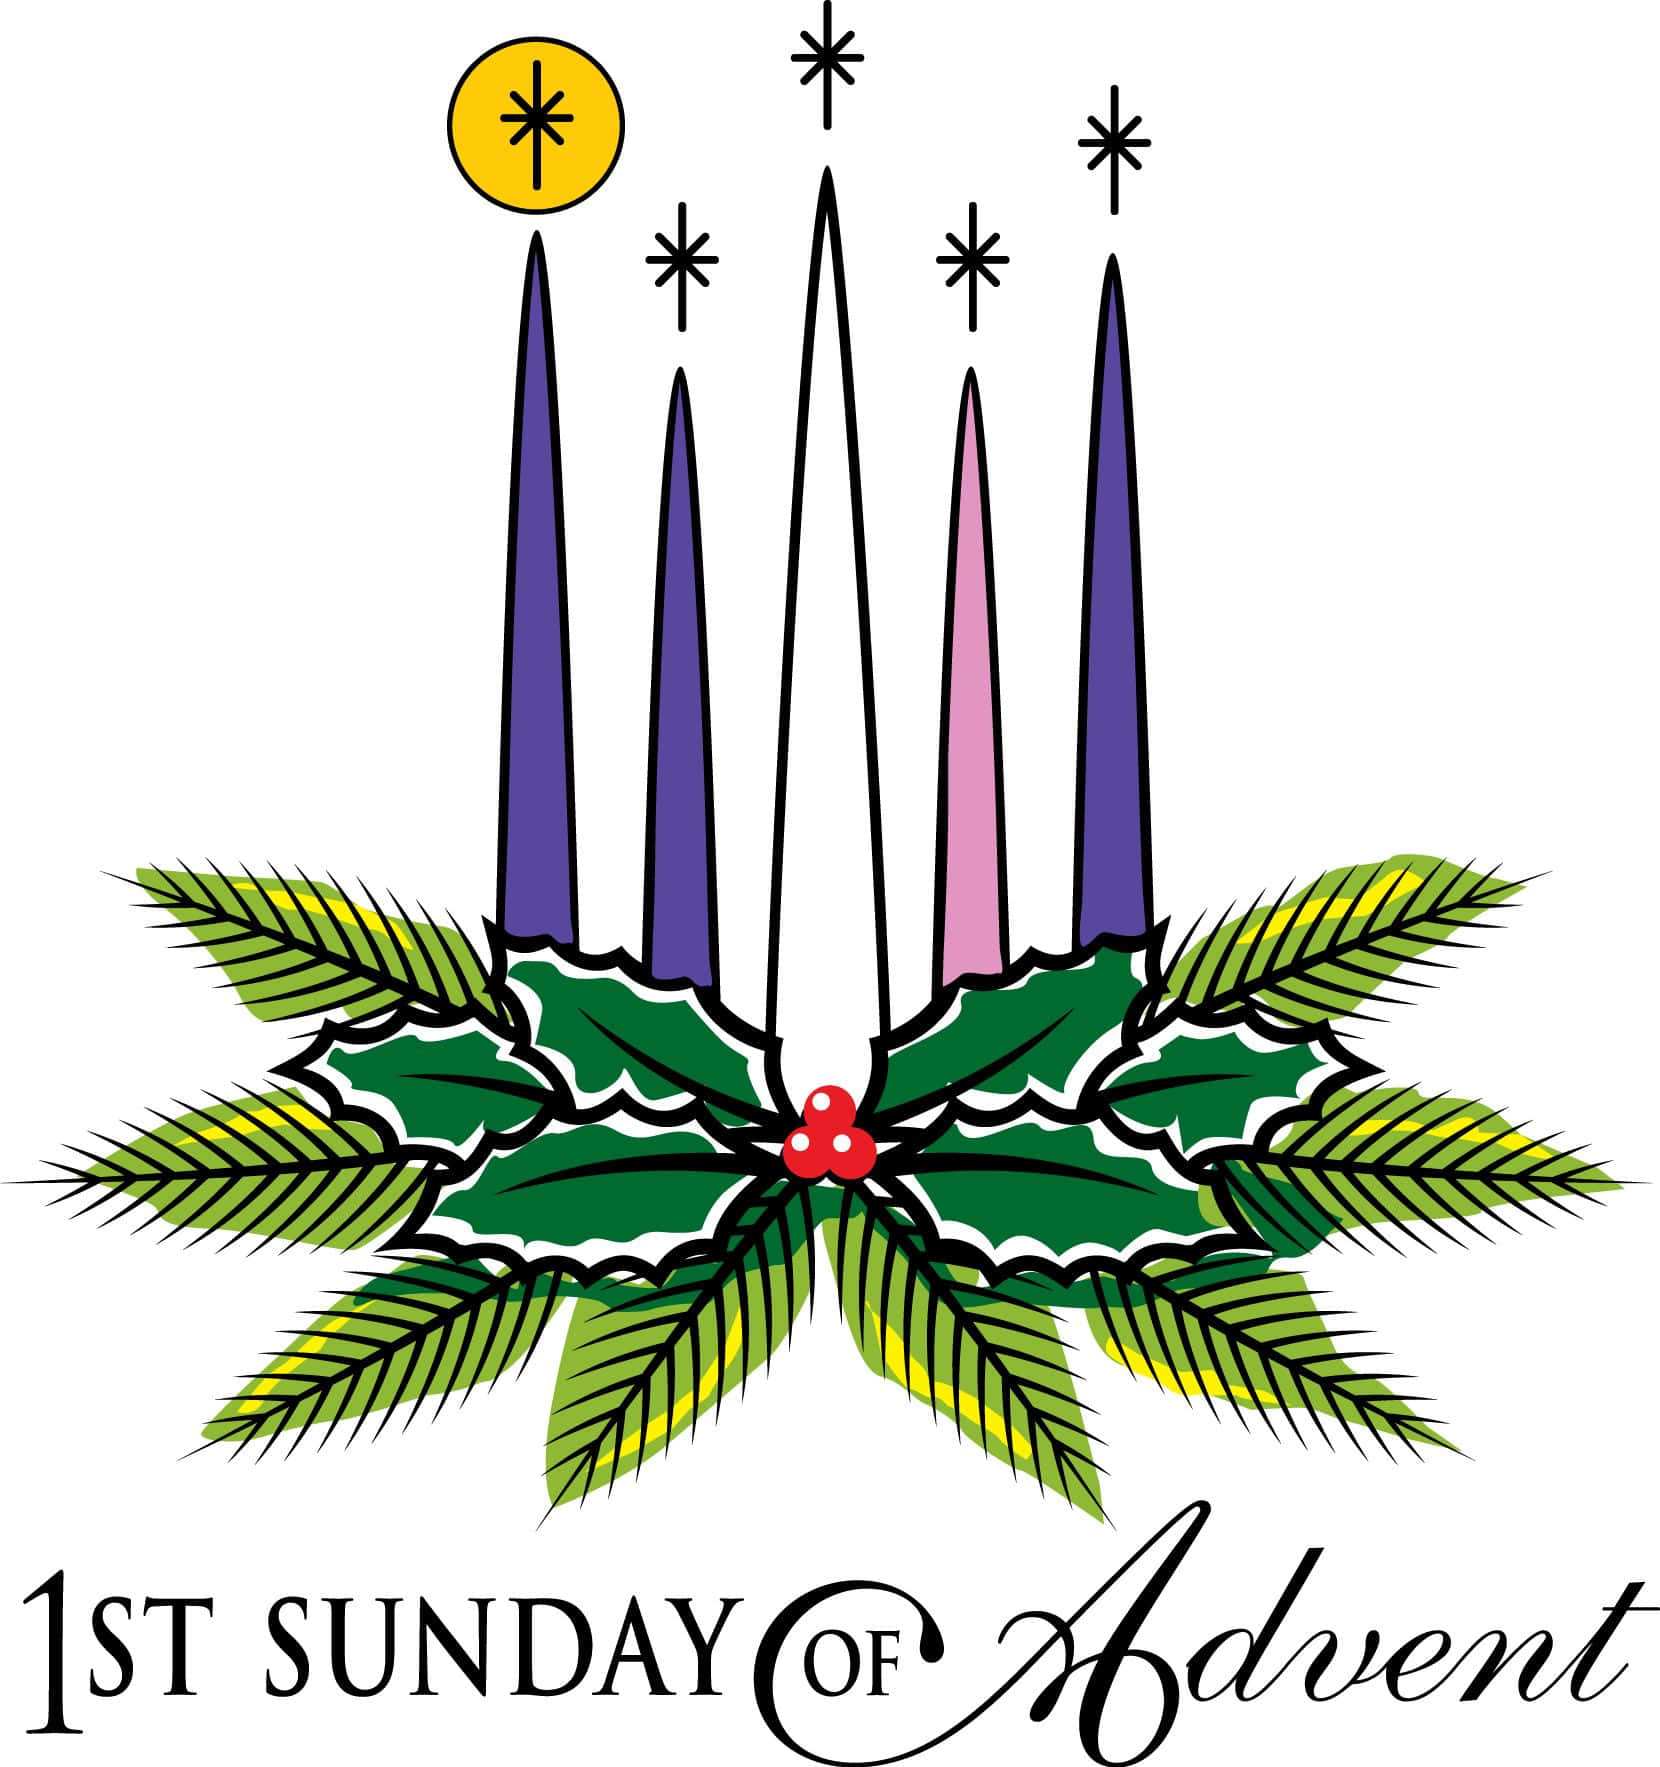 Glowing First Sunday Of Advent Candle Wallpaper